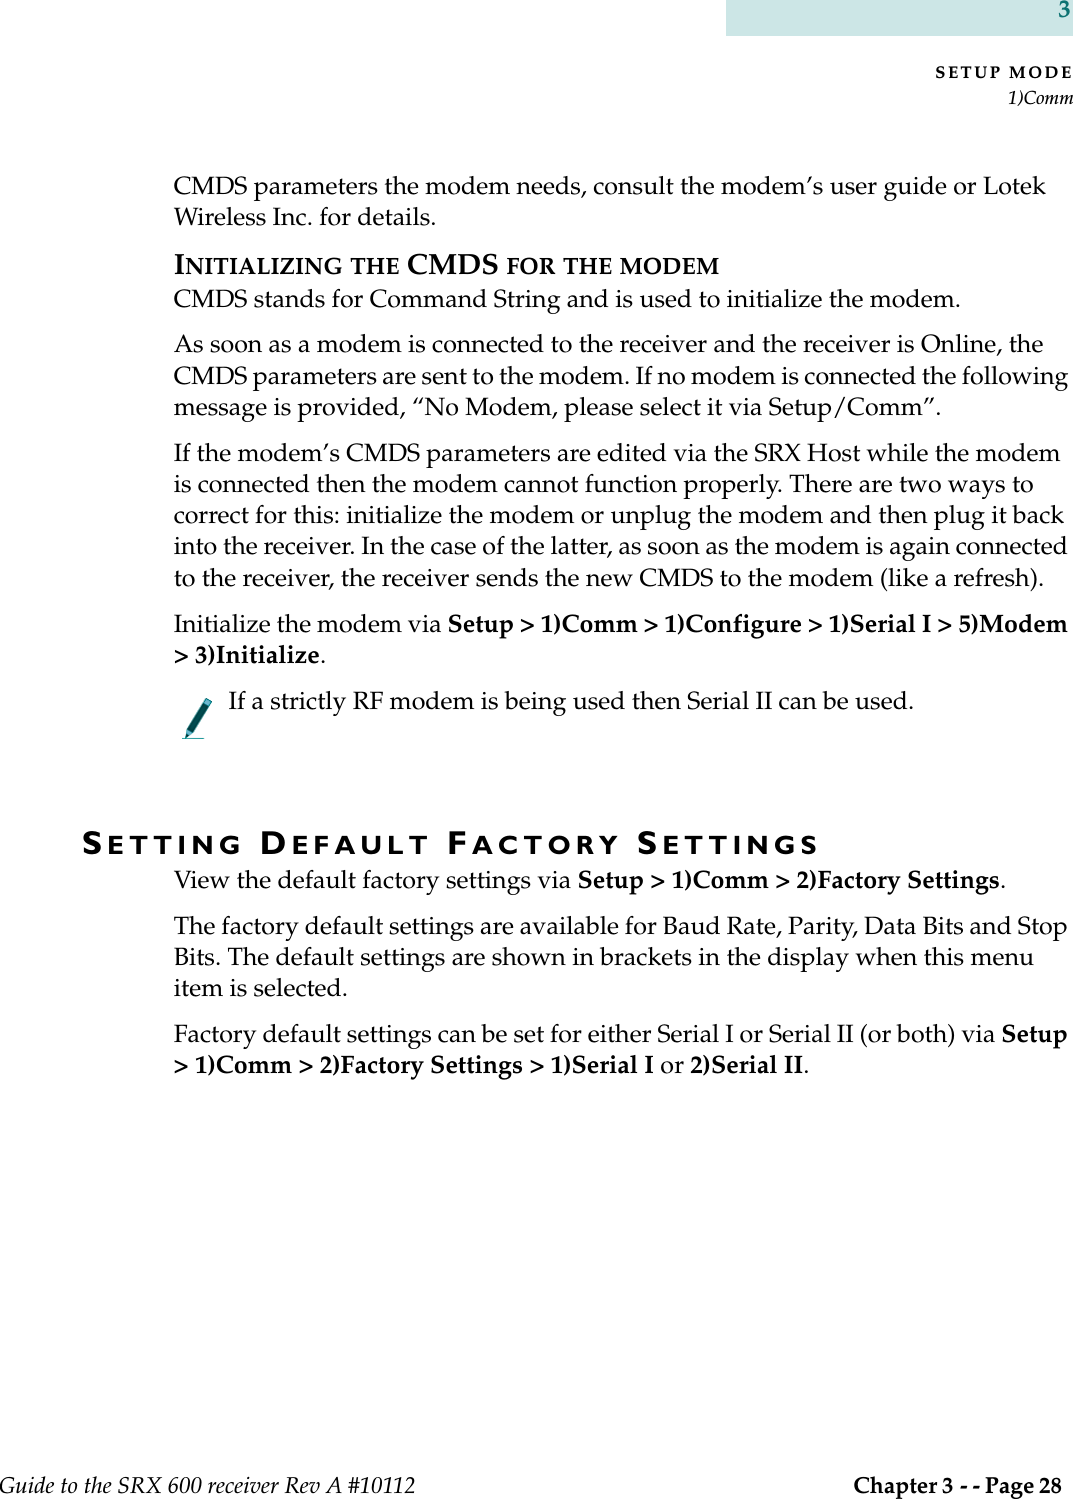 SETUP MODE1)CommGuide to the SRX 600 receiver Rev A #10112  Chapter 3 - - Page 28 3CMDS parameters the modem needs, consult the modem’s user guide or Lotek Wireless Inc. for details.INITIALIZING THE CMDS FOR THE MODEMCMDS stands for Command String and is used to initialize the modem. As soon as a modem is connected to the receiver and the receiver is Online, the CMDS parameters are sent to the modem. If no modem is connected the following message is provided, “No Modem, please select it via Setup/Comm”.If the modem’s CMDS parameters are edited via the SRX Host while the modem is connected then the modem cannot function properly. There are two ways to correct for this: initialize the modem or unplug the modem and then plug it back into the receiver. In the case of the latter, as soon as the modem is again connected to the receiver, the receiver sends the new CMDS to the modem (like a refresh).Initialize the modem via Setup &gt; 1)Comm &gt; 1)Configure &gt; 1)Serial I &gt; 5)Modem &gt; 3)Initialize. If a strictly RF modem is being used then Serial II can be used.SETTING DEFAULT FACTORY SETTINGSView the default factory settings via Setup &gt; 1)Comm &gt; 2)Factory Settings. The factory default settings are available for Baud Rate, Parity, Data Bits and Stop Bits. The default settings are shown in brackets in the display when this menu item is selected. Factory default settings can be set for either Serial I or Serial II (or both) via Setup &gt; 1)Comm &gt; 2)Factory Settings &gt; 1)Serial I or 2)Serial II.